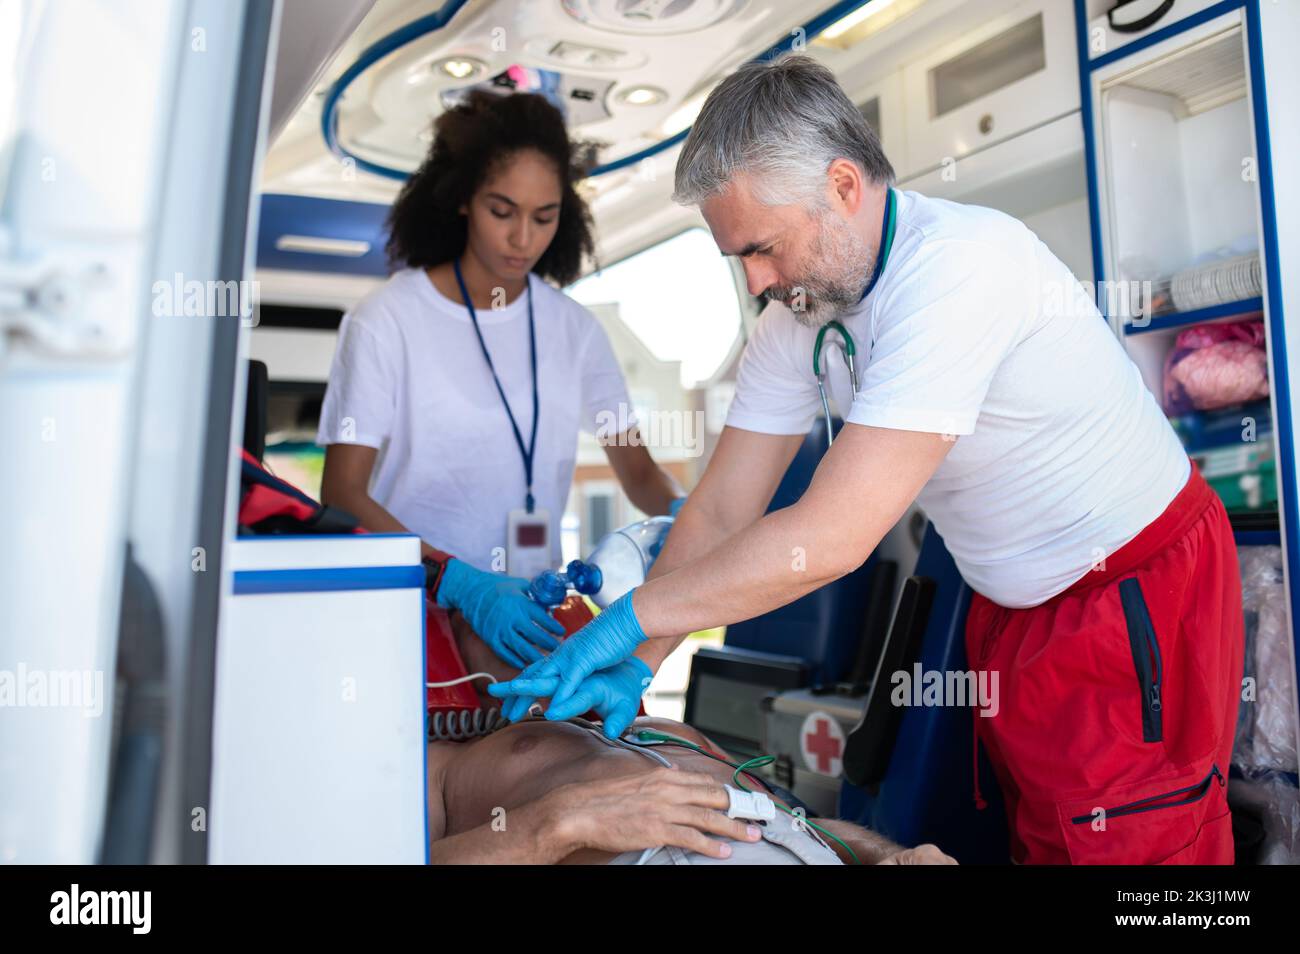 Ambulance doctors performing cardiopulmonary resuscitation on a critical patient Stock Photo